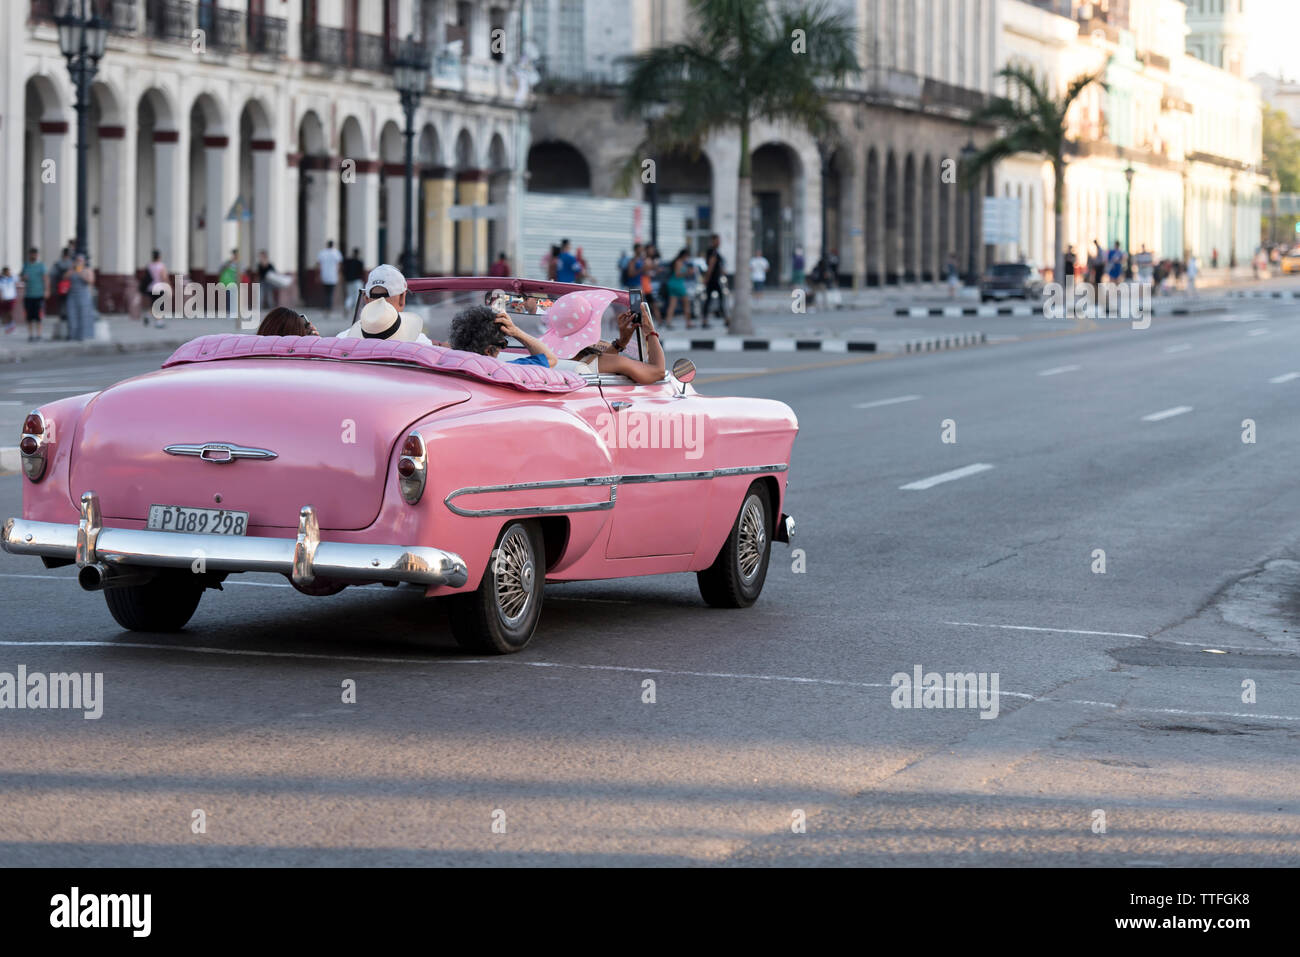 Pink, convertible vintage car driving in the streets of Havana, Cuba. Stock Photo